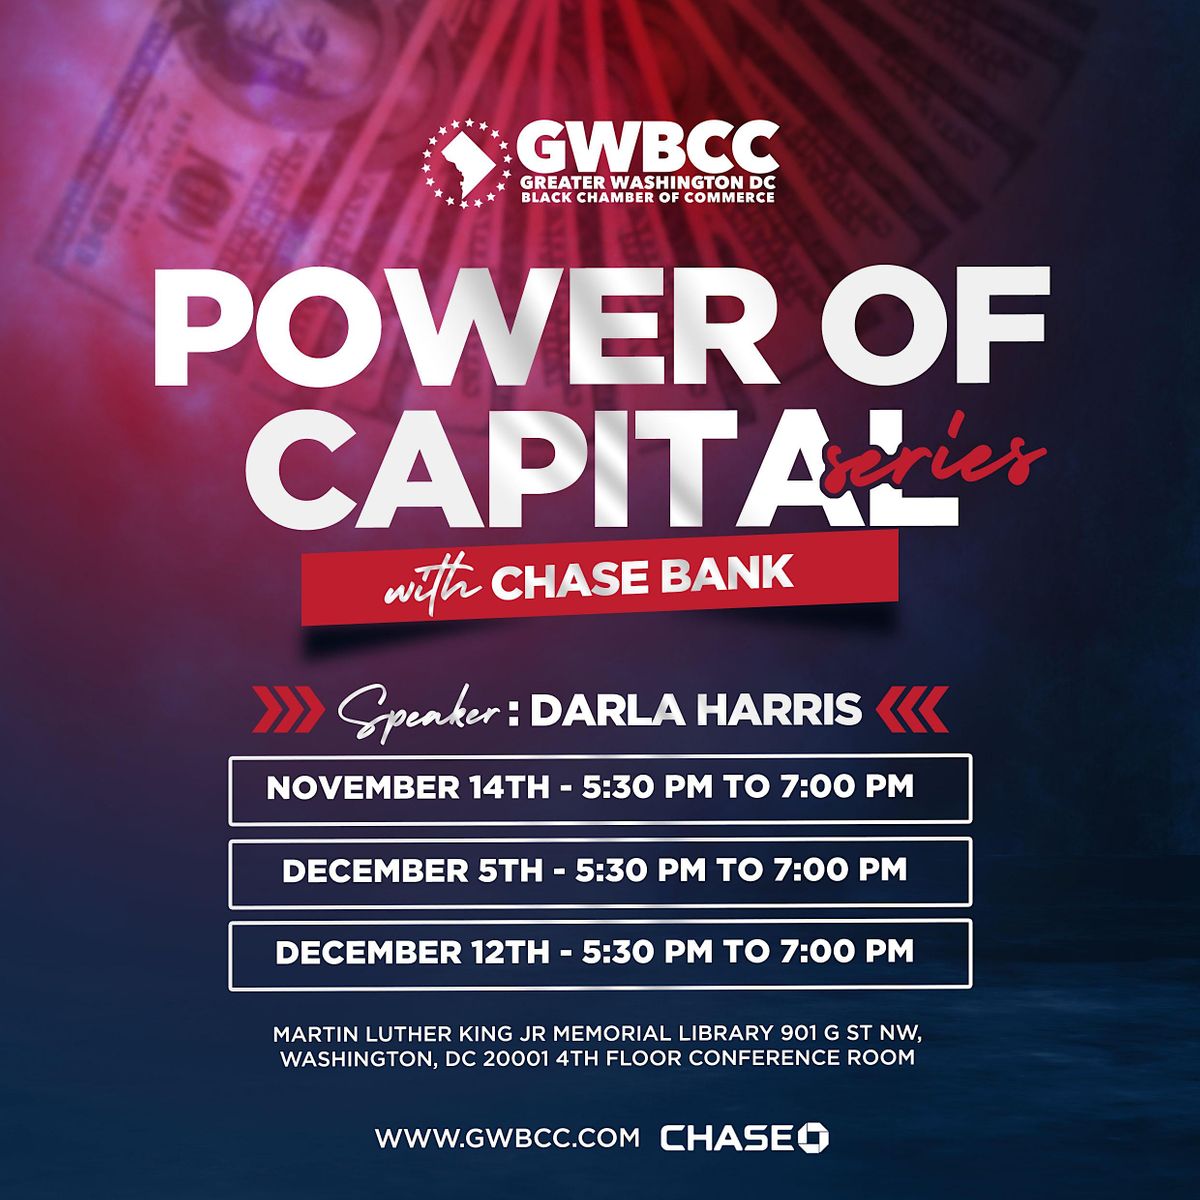 GWBCC Presents Power of Capital Series with Chase Bank Pt 3